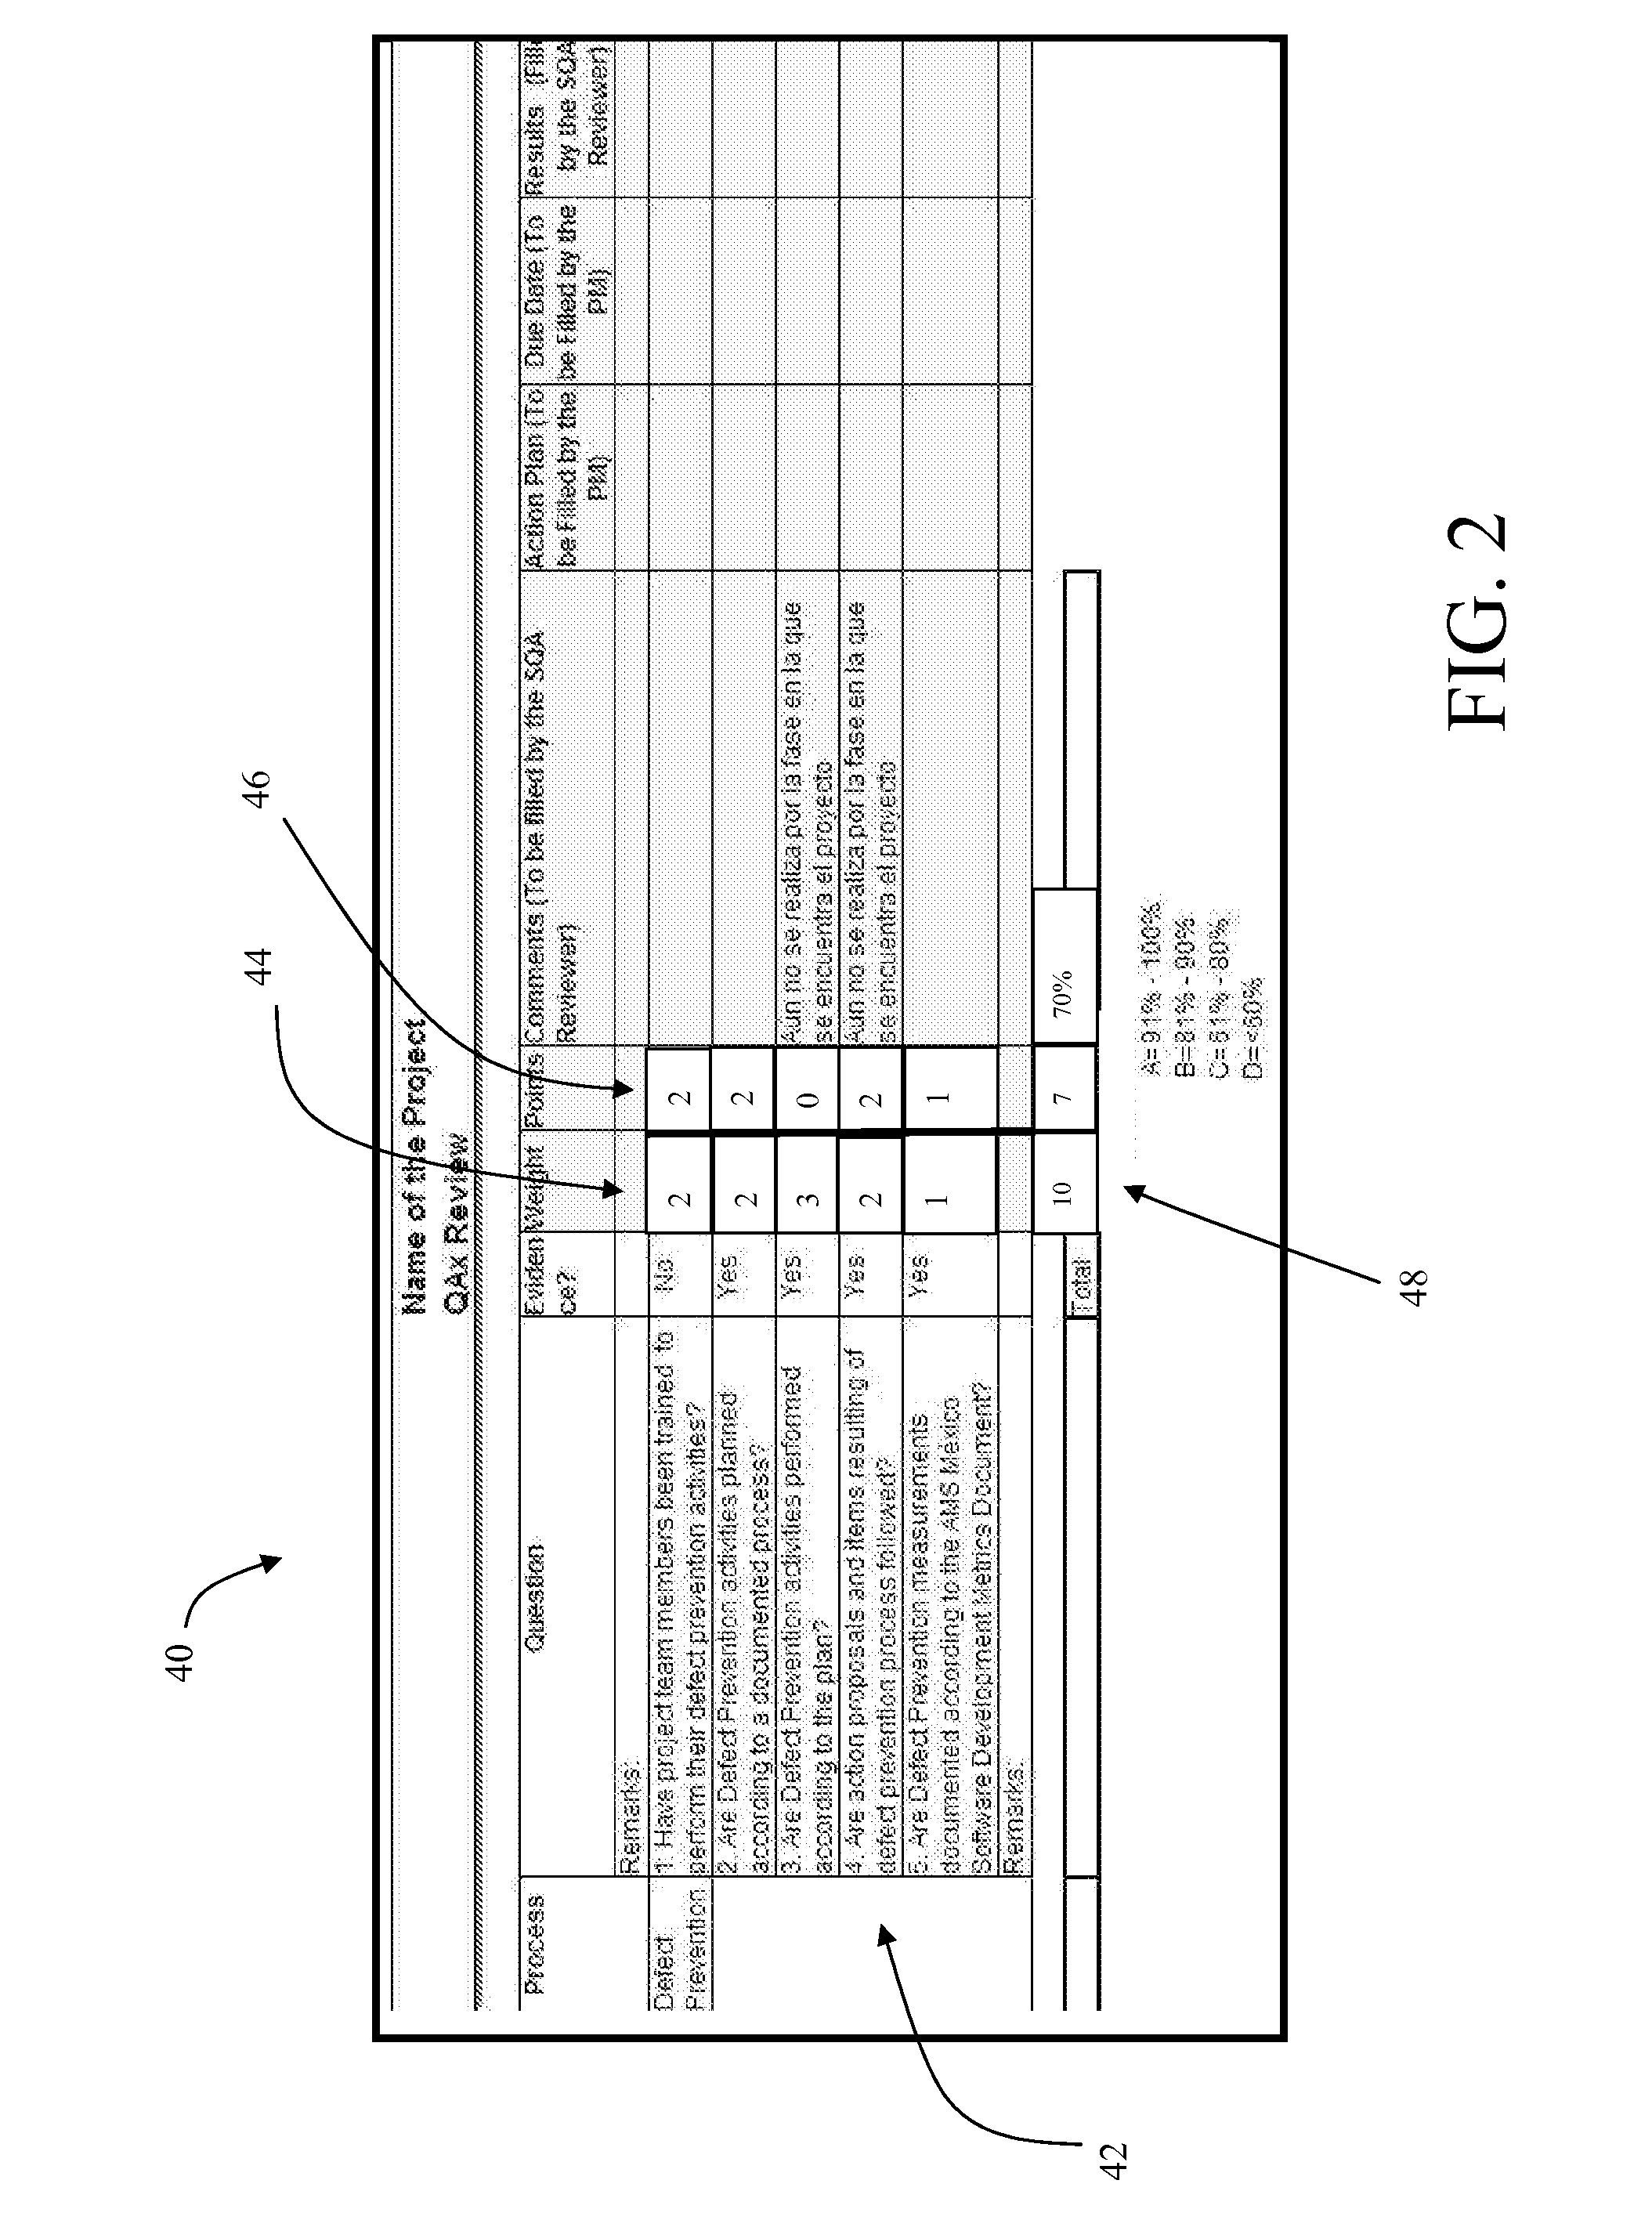 System and method for evaluating adherence to a standardized process